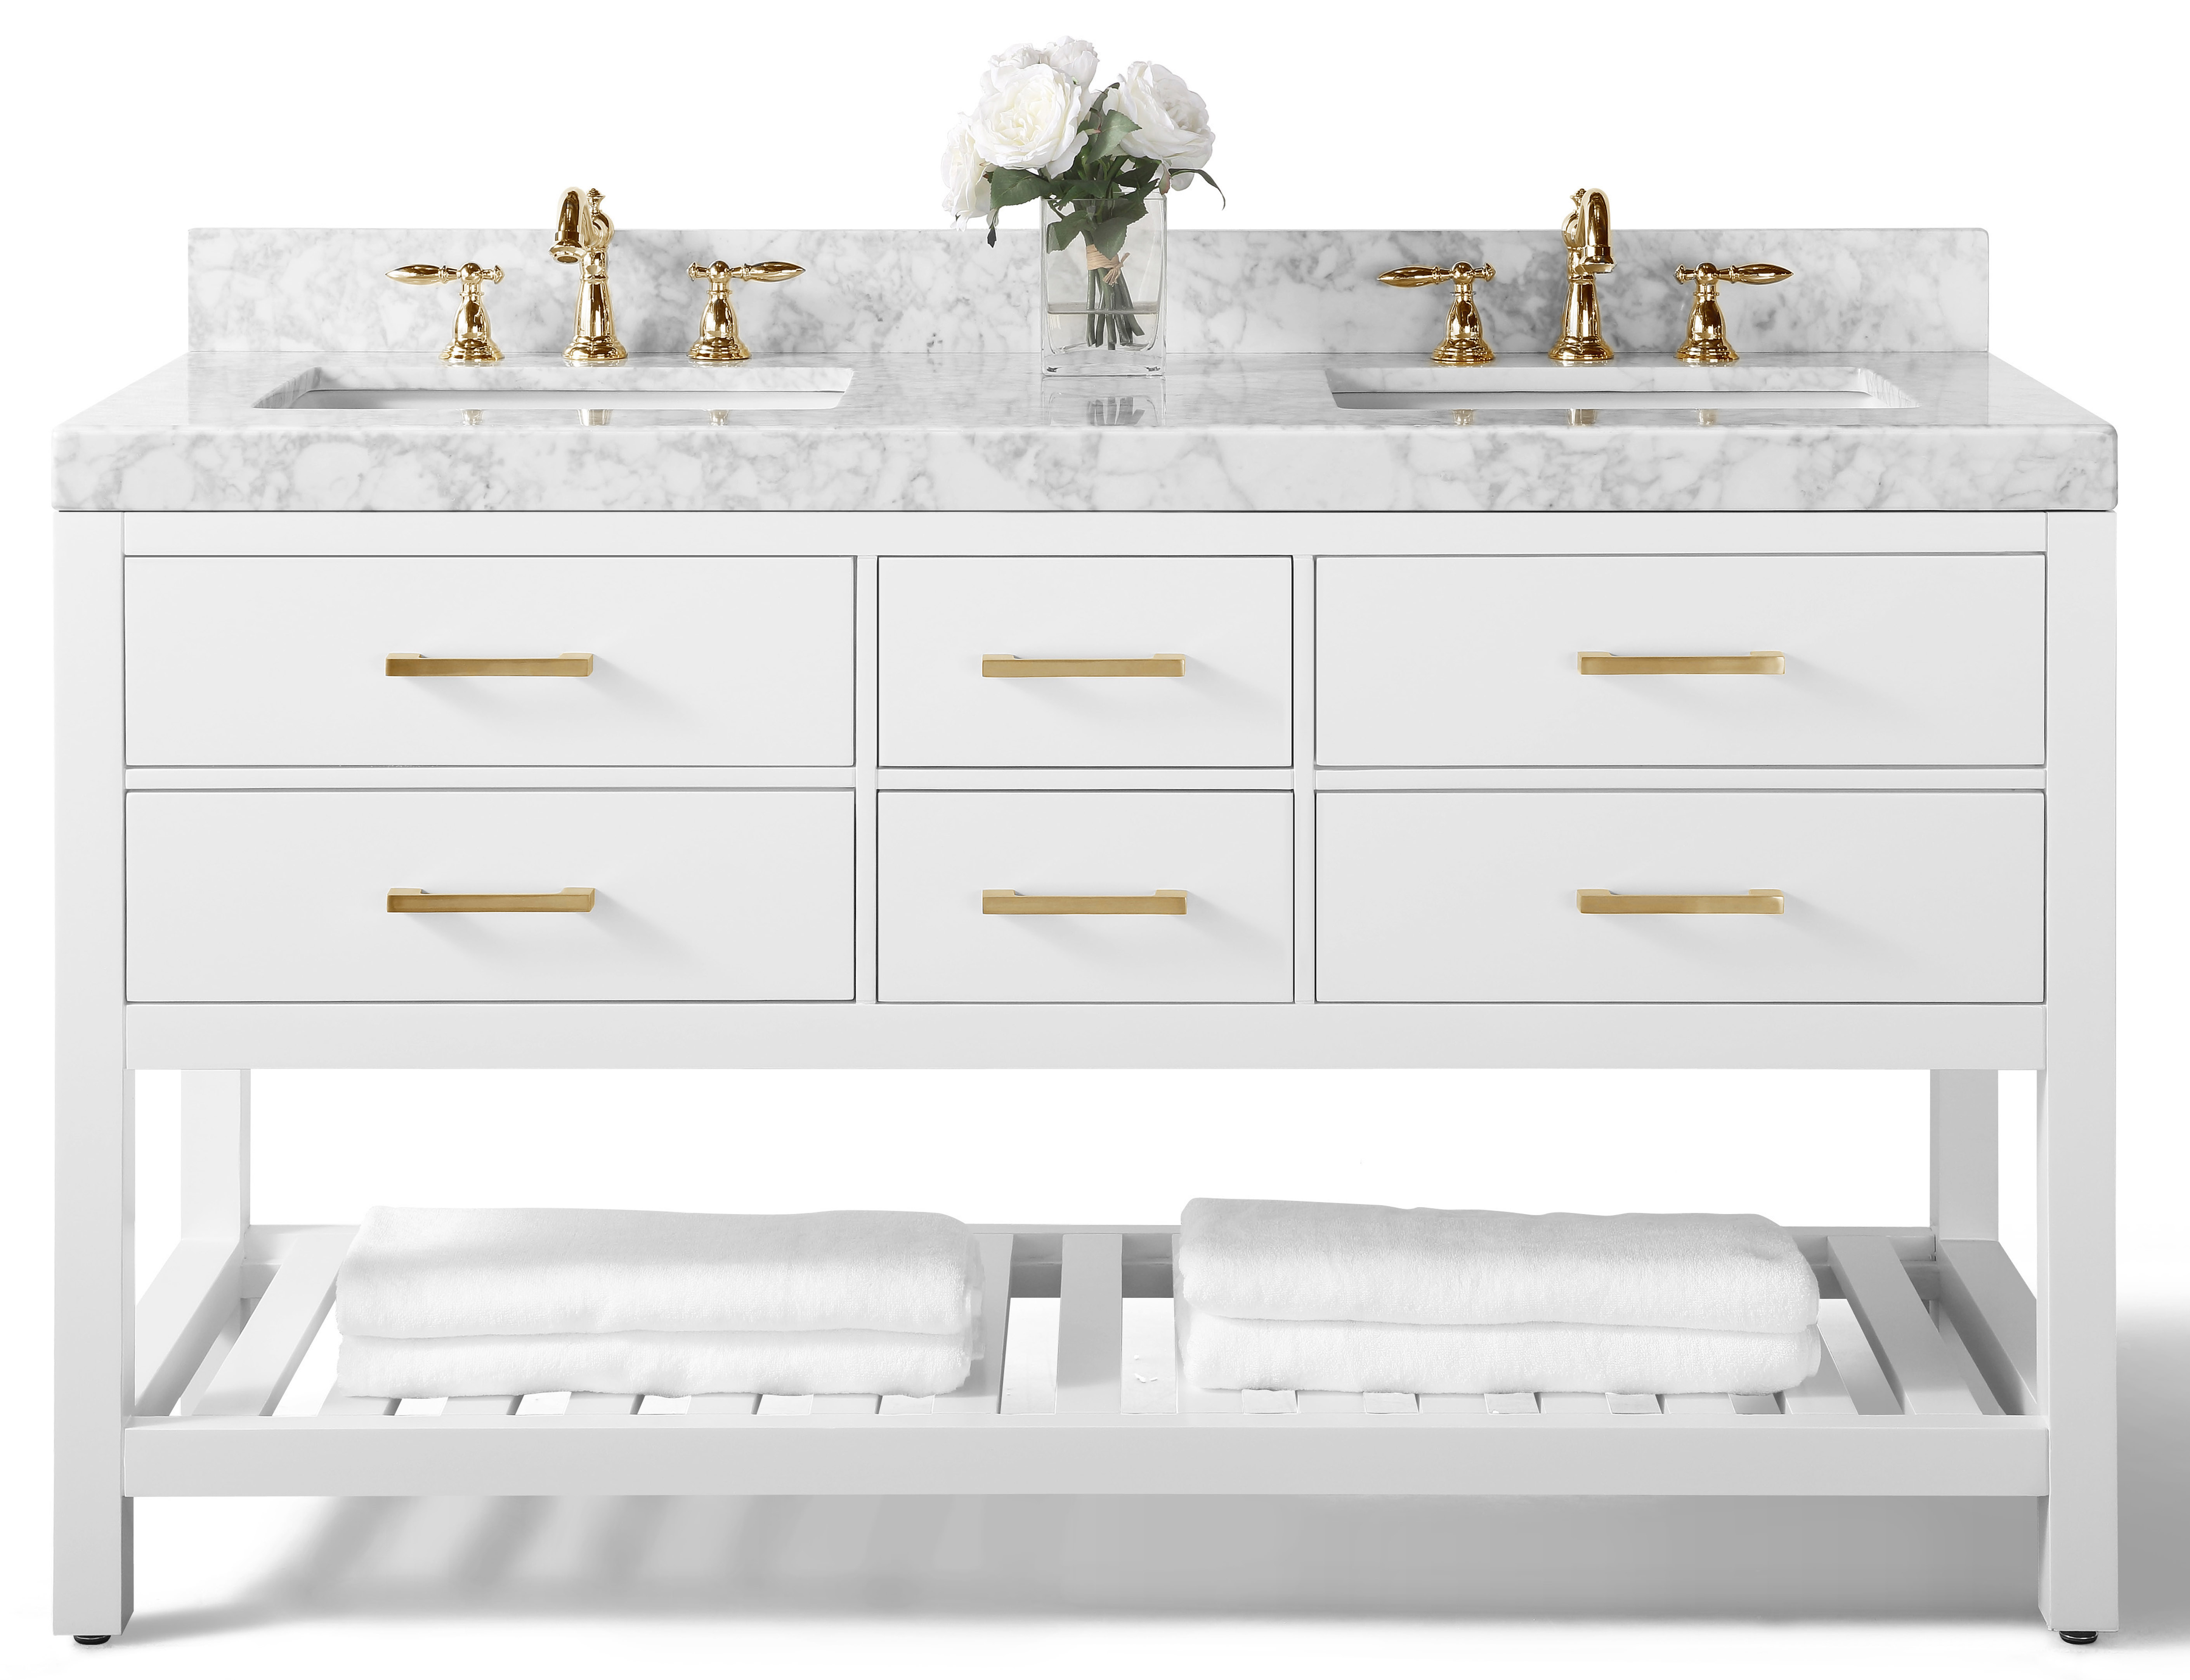 60" Double Sink Bath Vanity Set in White with Italian Carrara White Marble Vanity top and White Undermount Basin with Top and Mirror Options